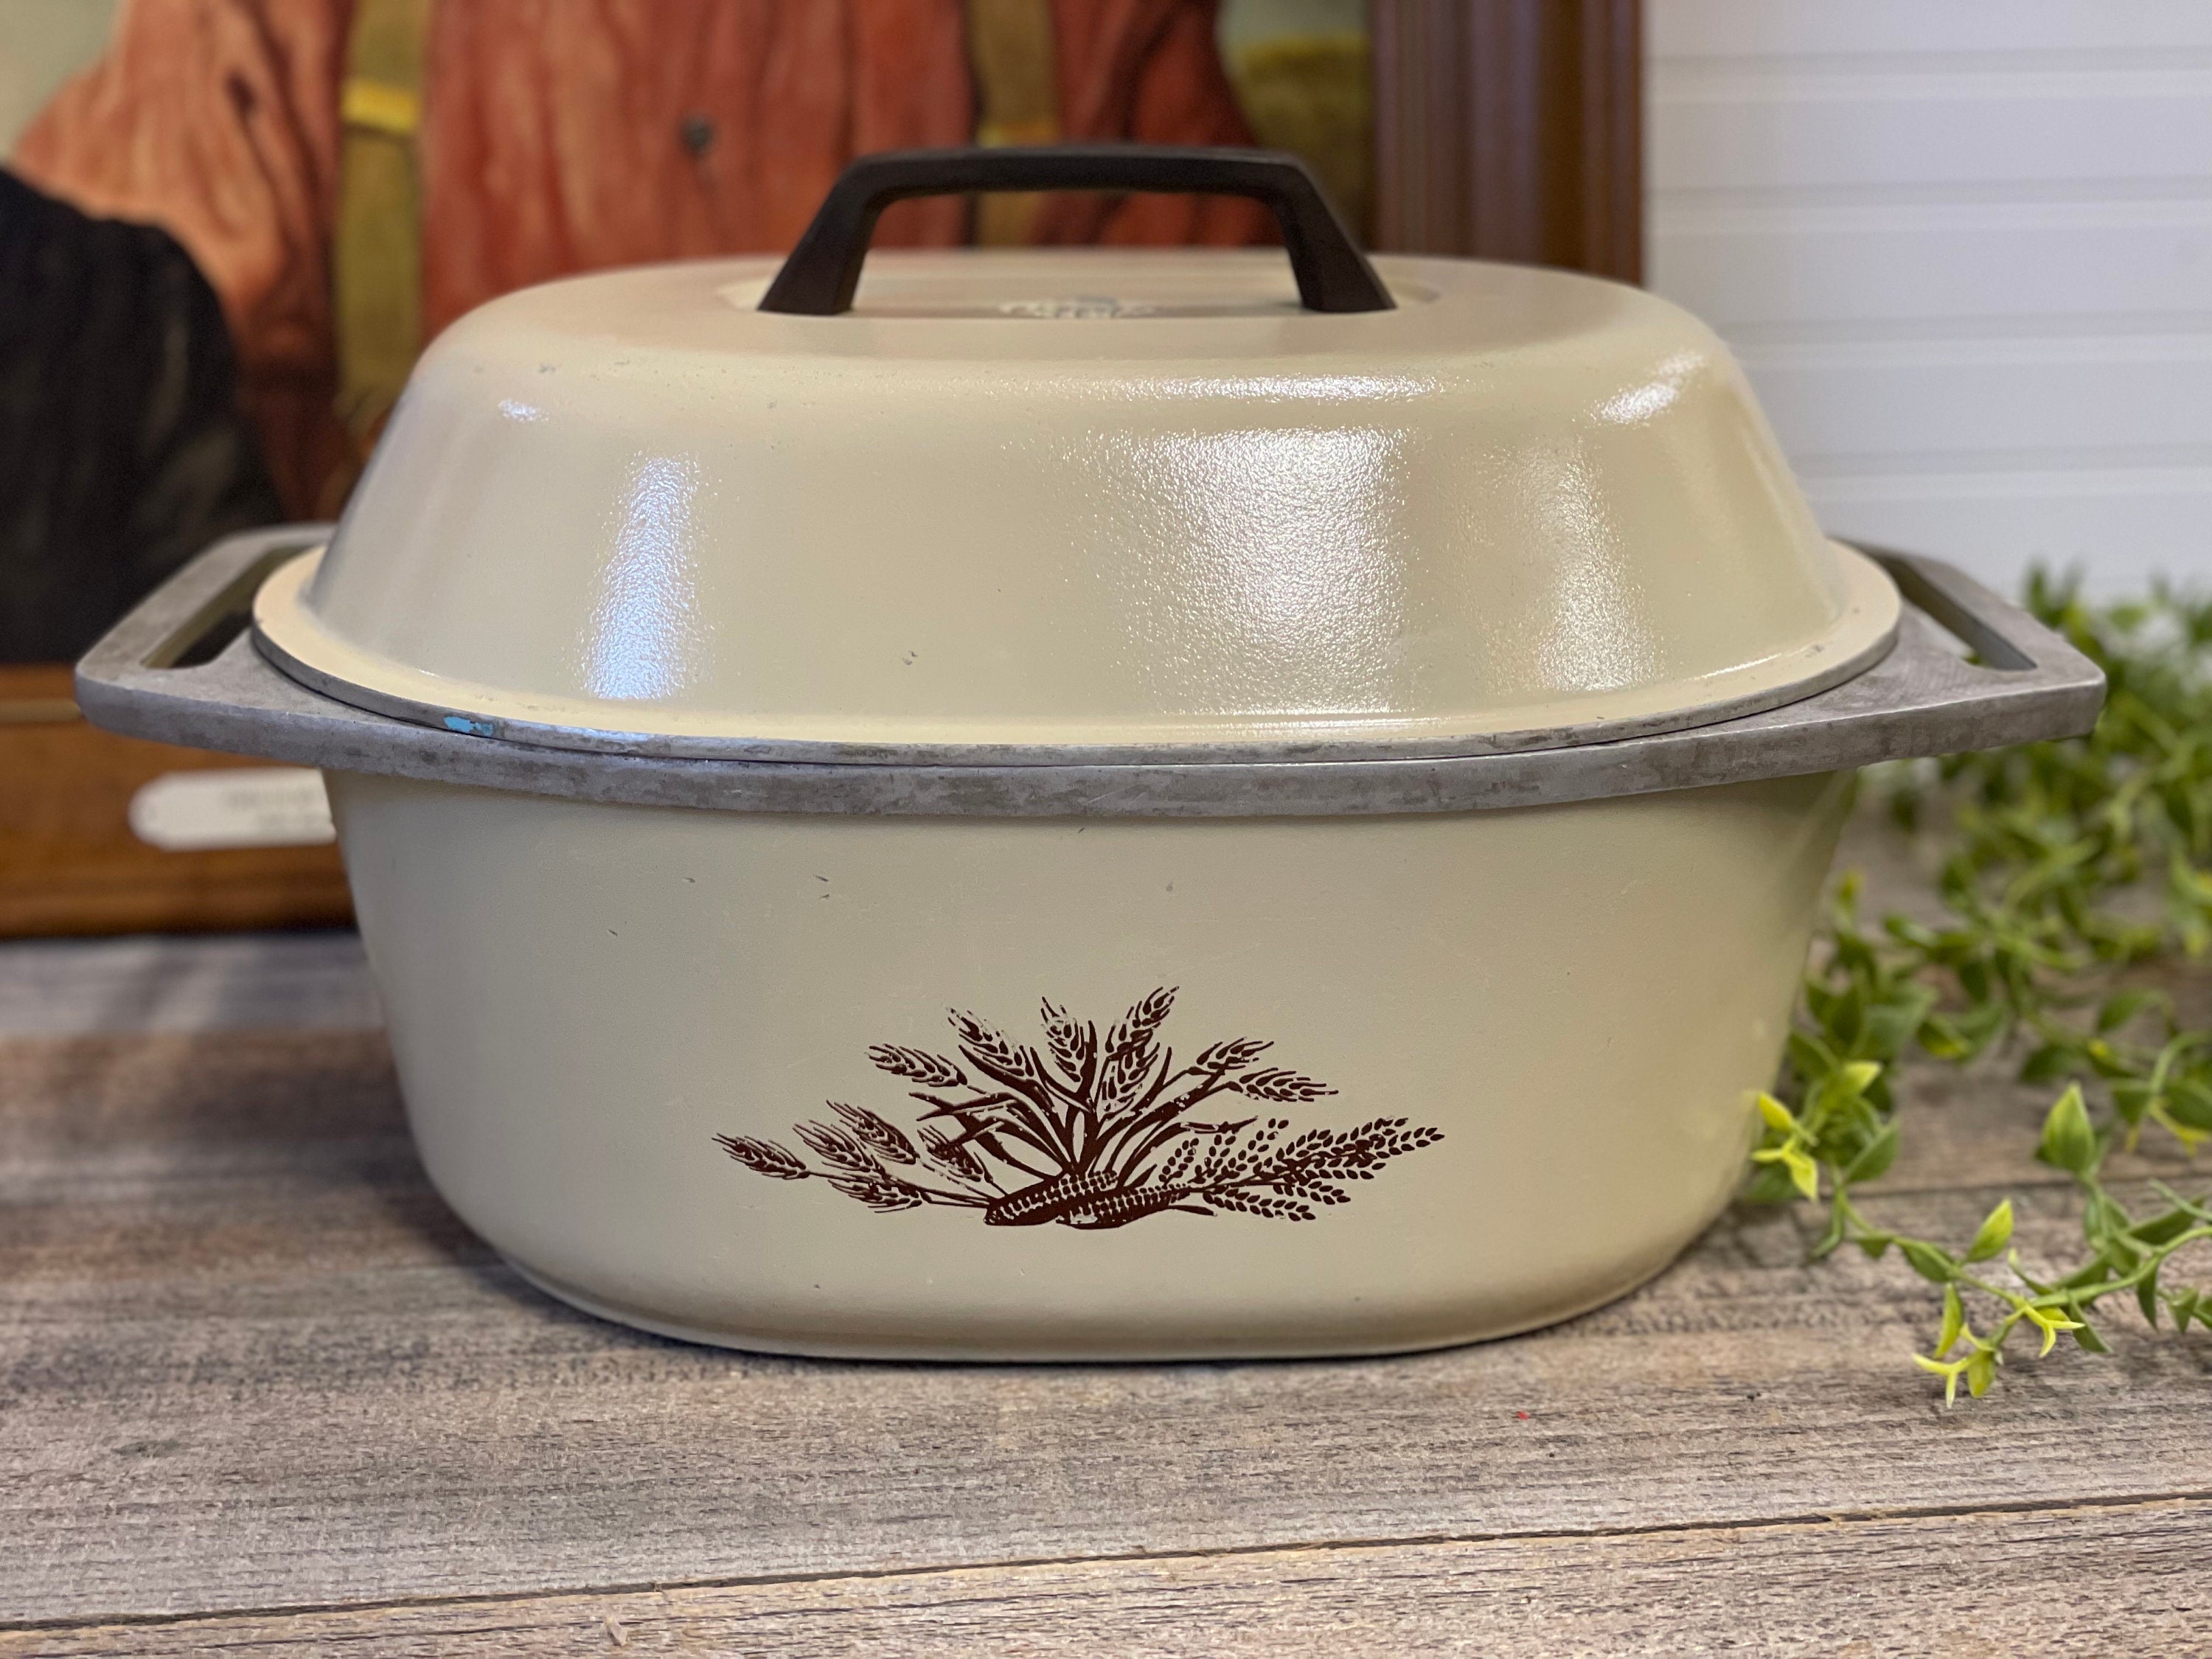  Magnaware Cast Aluminum Dutch Oven - Oval Dutch Oven Pot with  Lid for Families and Parties - Lightweight Cajun Cookware with Ideal Heat  Distribution - Oval Roaster Pan with Lid 